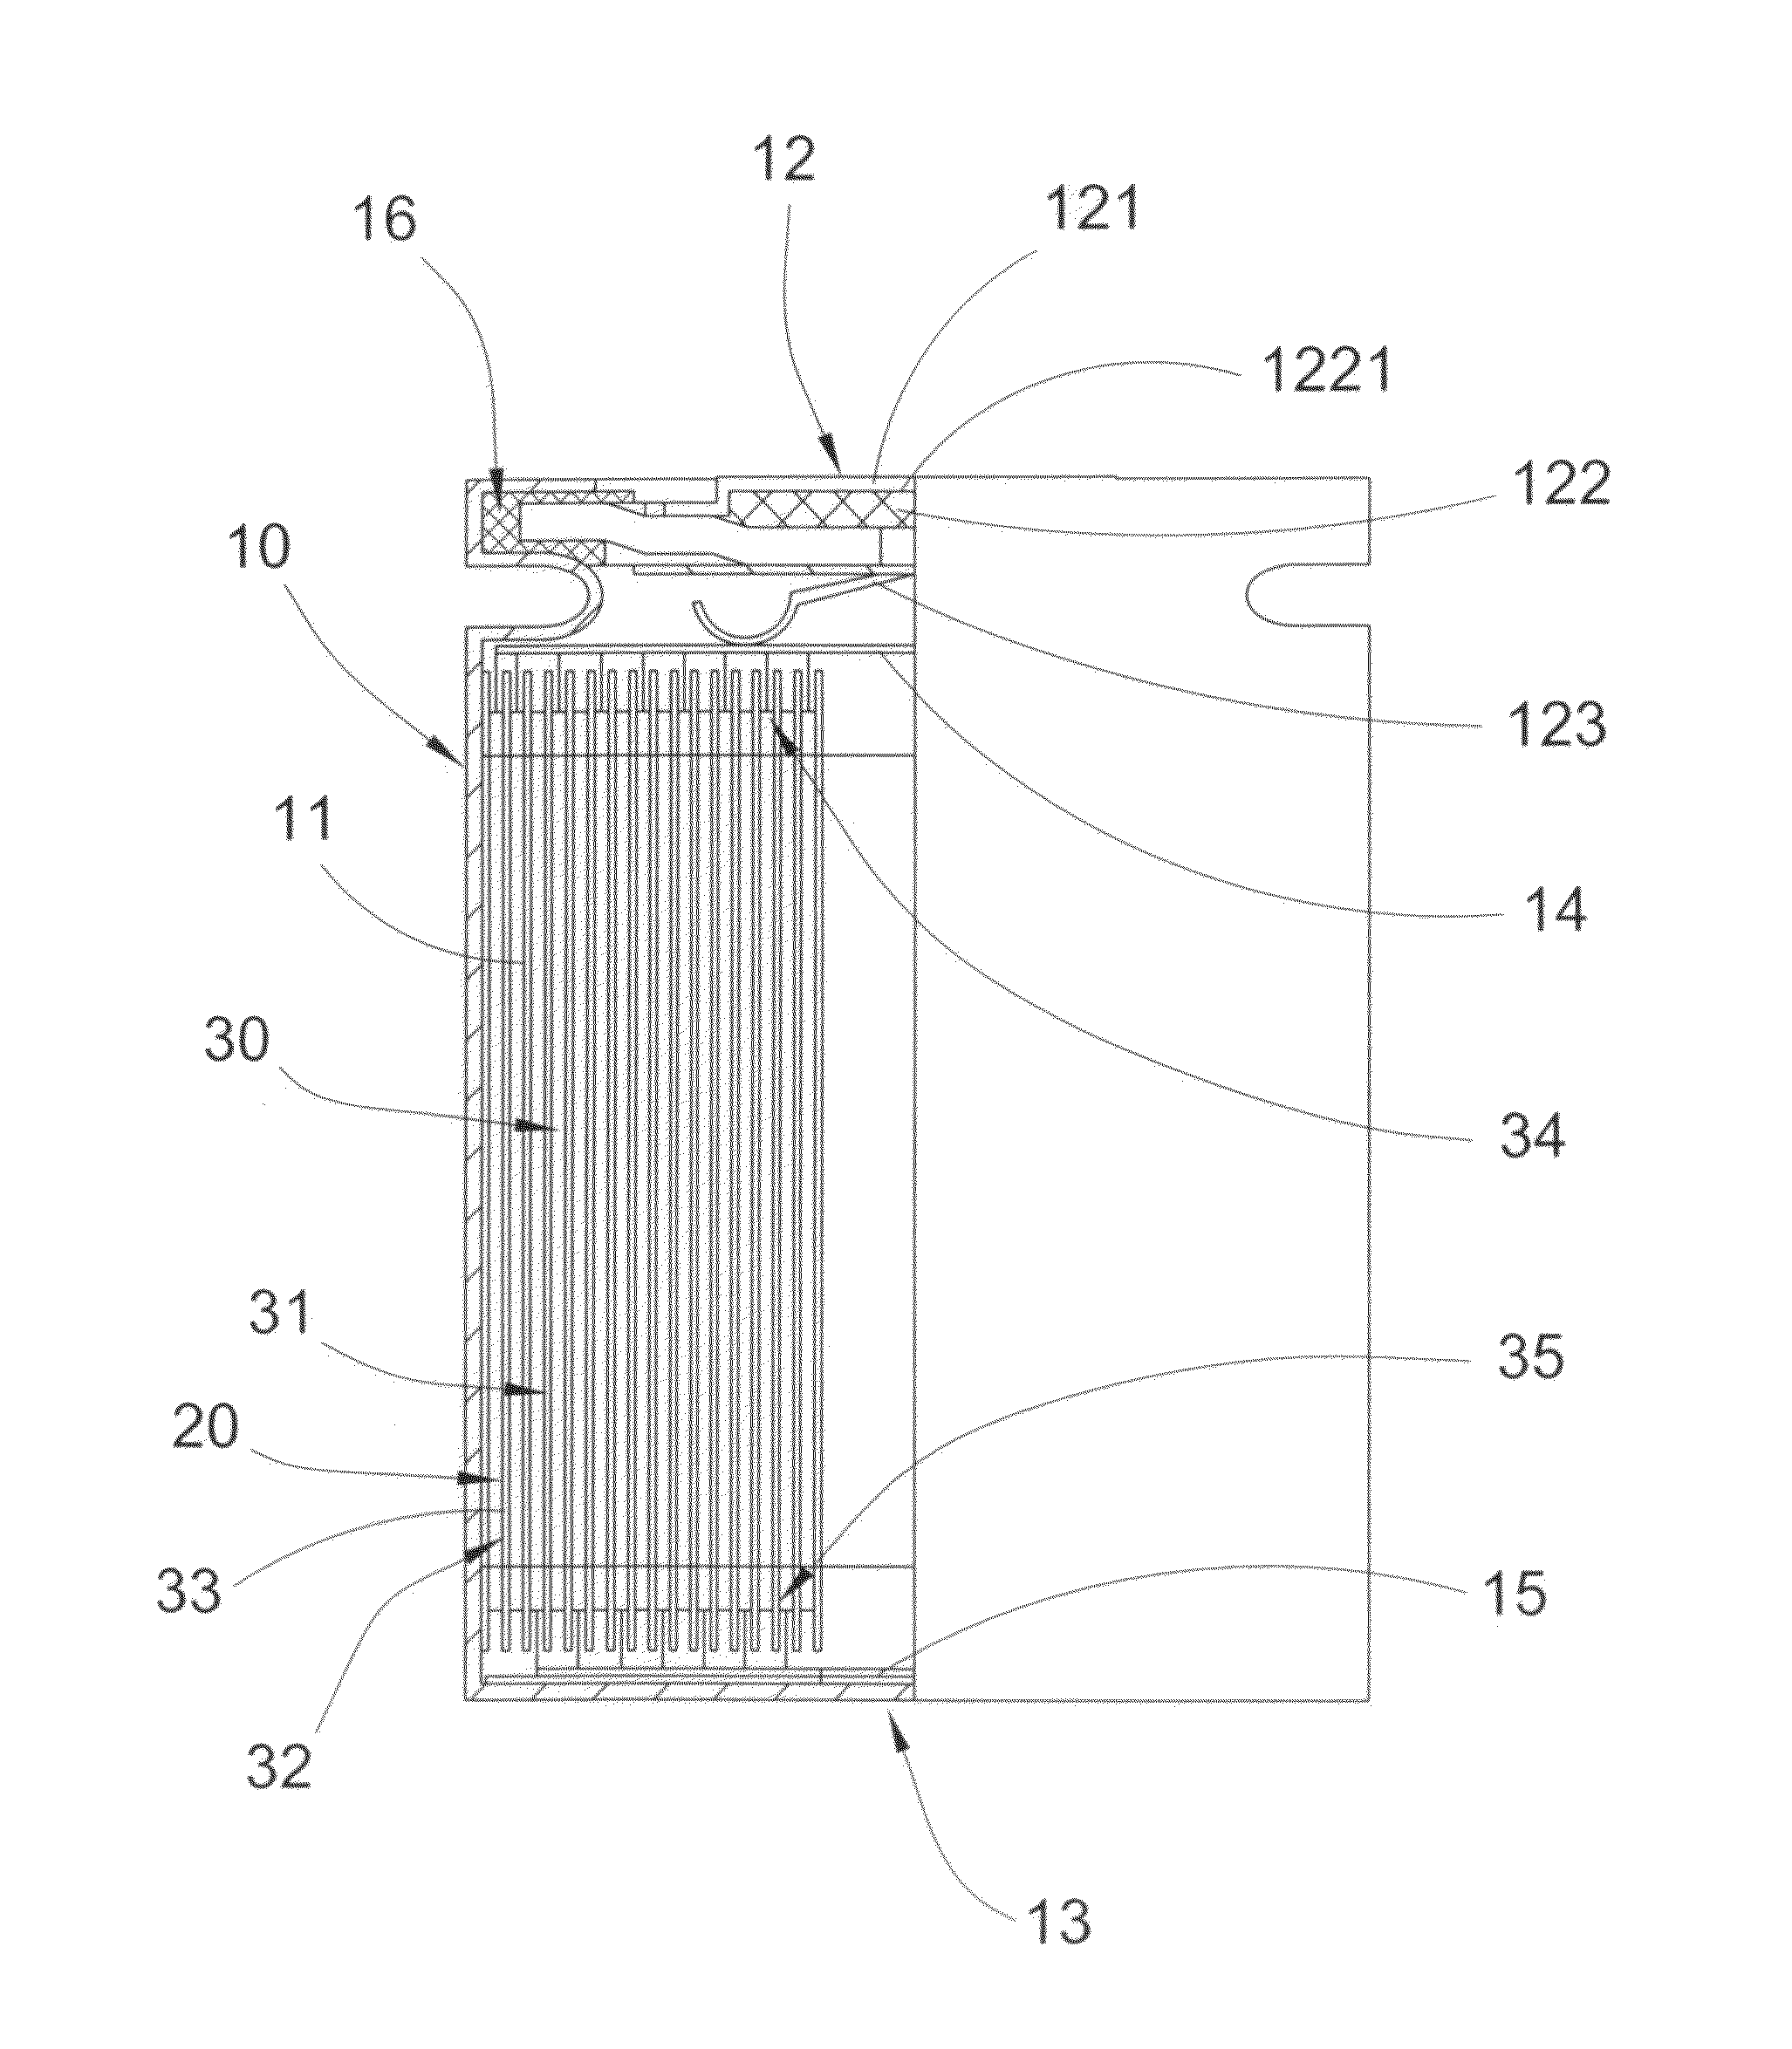 Additive for nickel-zinc battery